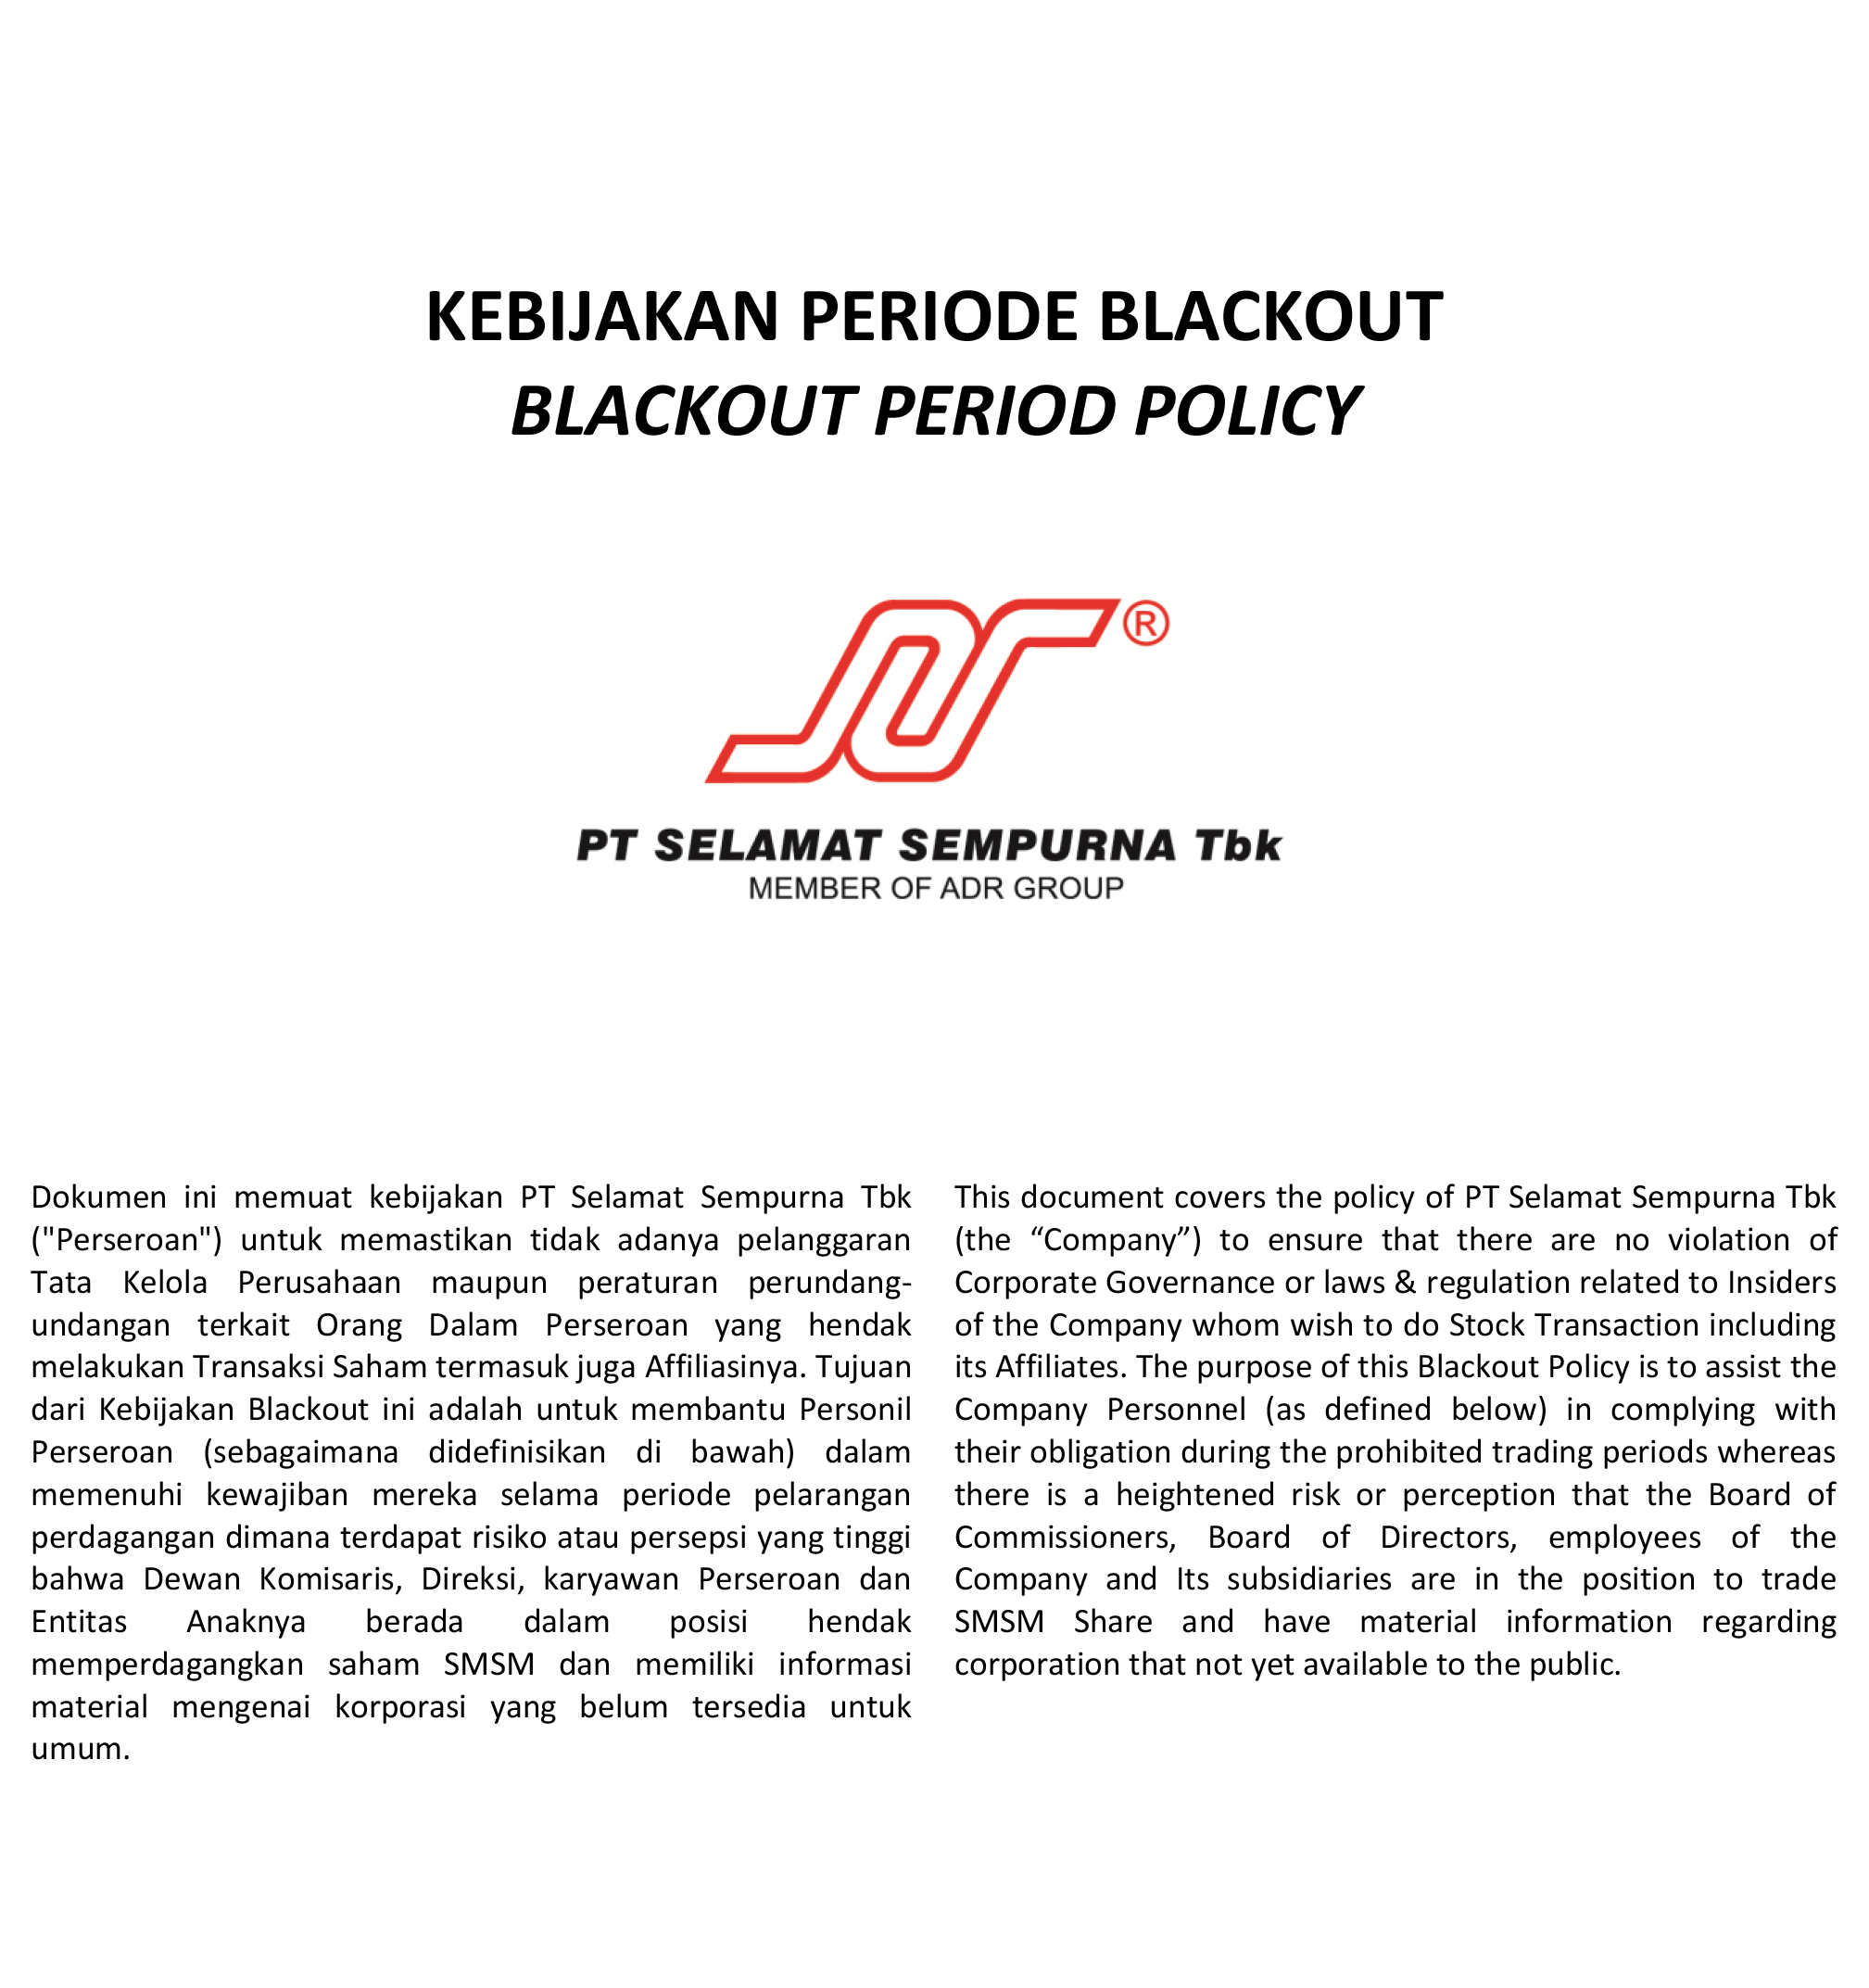 Blackout Period Policy